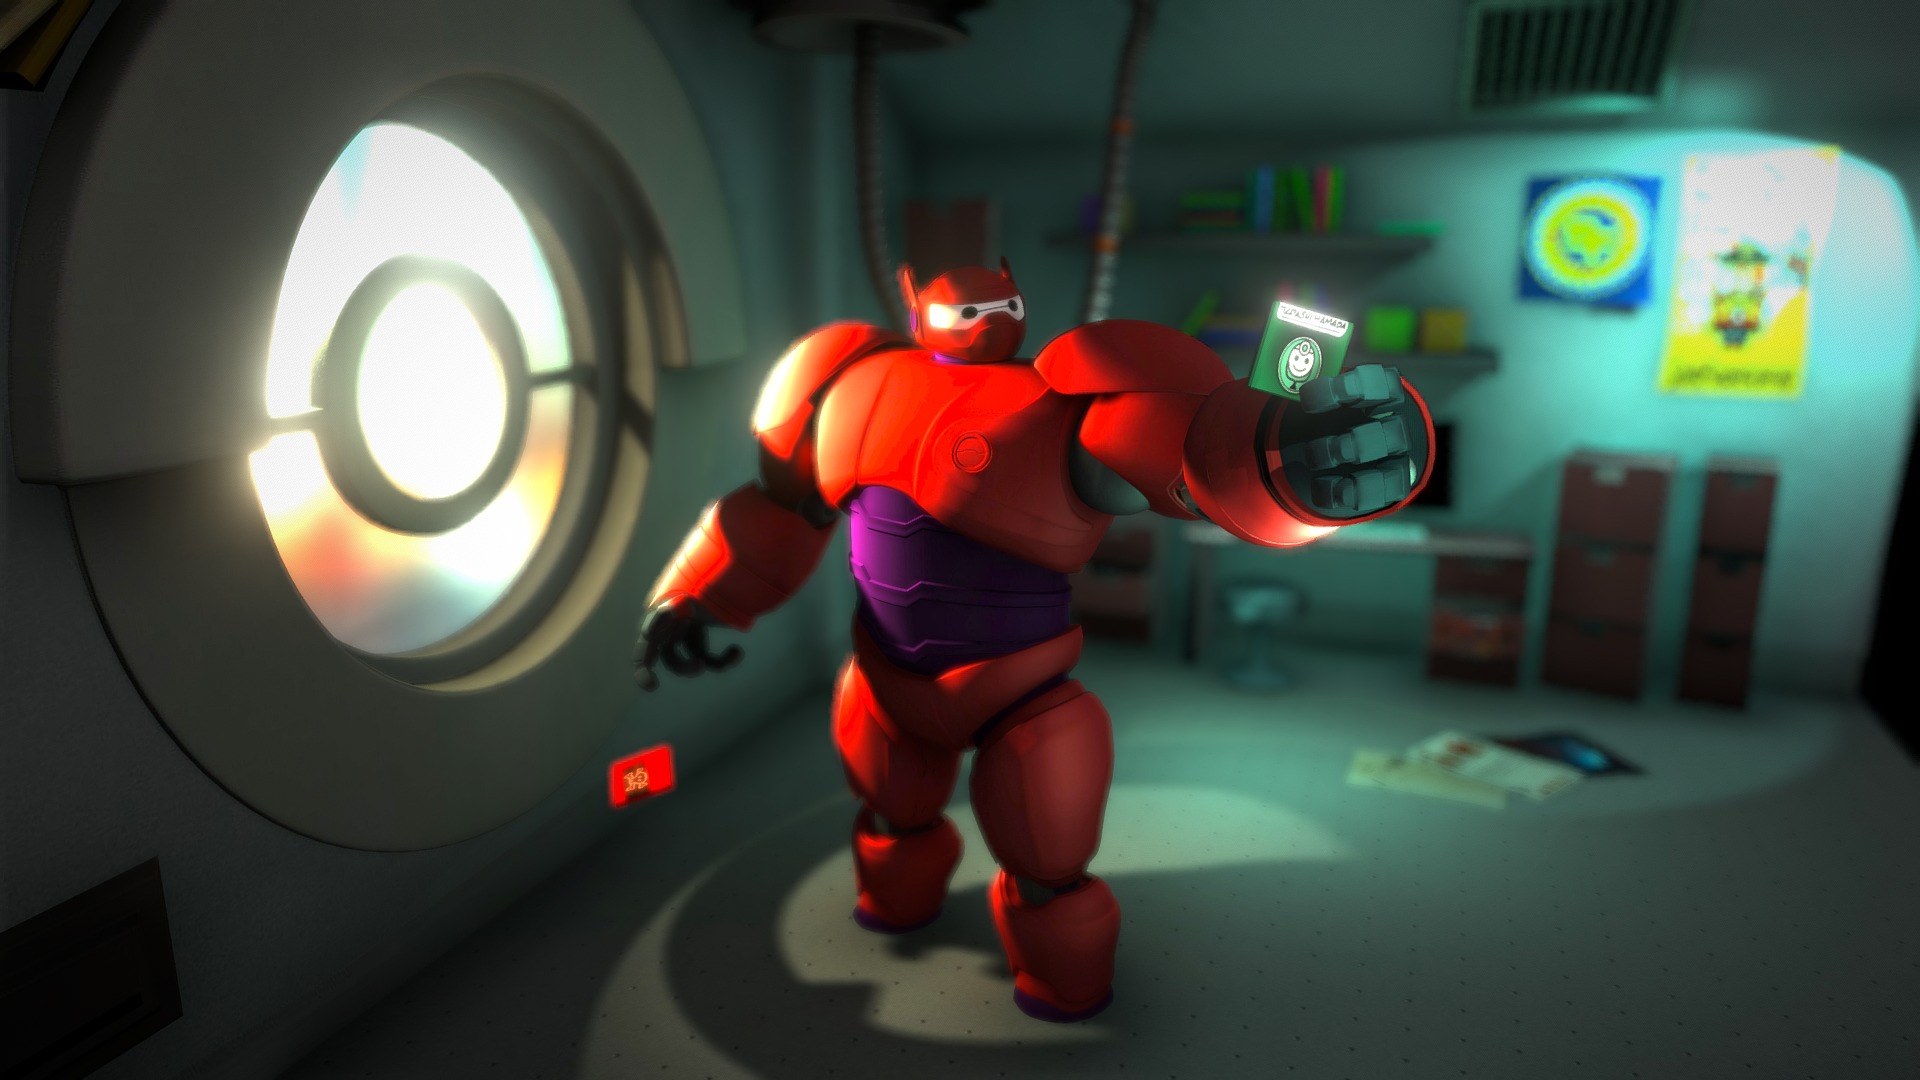 I am a huge Pixar/Disney fan and my two year old boy Oscar is mad on &lsquo;Baymax' so I had the perfect excuse to loose myself in poly heaven for a bit and create a Baymax 2.0 scene.

I wanted to have another go at Mental Ray lighting with the idea of baking that lighting directly into the textures.  You will see that the shadeless mode is used, all lighting in the scene is &lsquo;generated' by the materials.

The scene background is a take on a Pixar/Disney/Comic book theme with a simple &lsquo;blocky' style, I'm happy with how it turned out.

You will notice that Baymax is also holding his Tadashi Chip, my little boy is obsessed with the Baymax chip scenes!

Hope you like it.

Blog Post:  https://forum.sketchfab.com/t/creating-baymax/7838/8 - Scene - Baymax Lab - Buy Royalty Free 3D model by JCulley3D (@jamesculley) 3d model